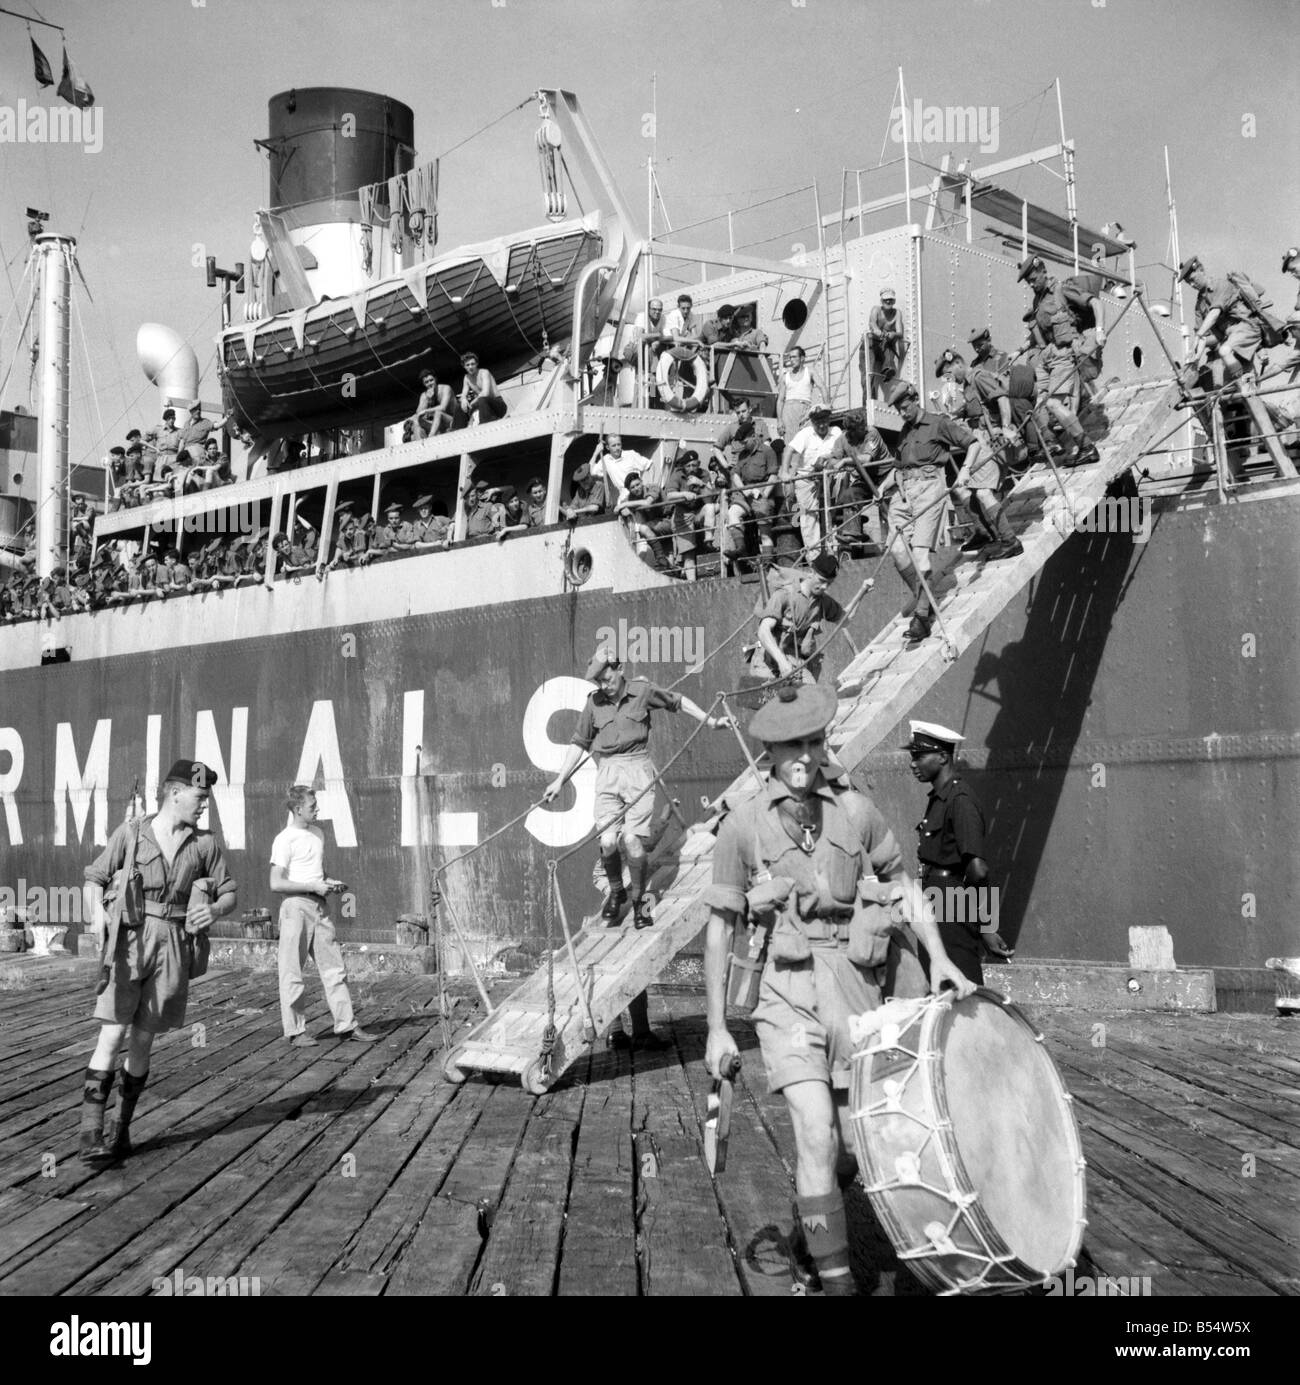 George Town British Guiana the Argyle and Sutherland highlanders landed at Atkinson Wharf 25 miles from George Town following their sea voyage from England. October 1953 D6341-001 Stock Photo